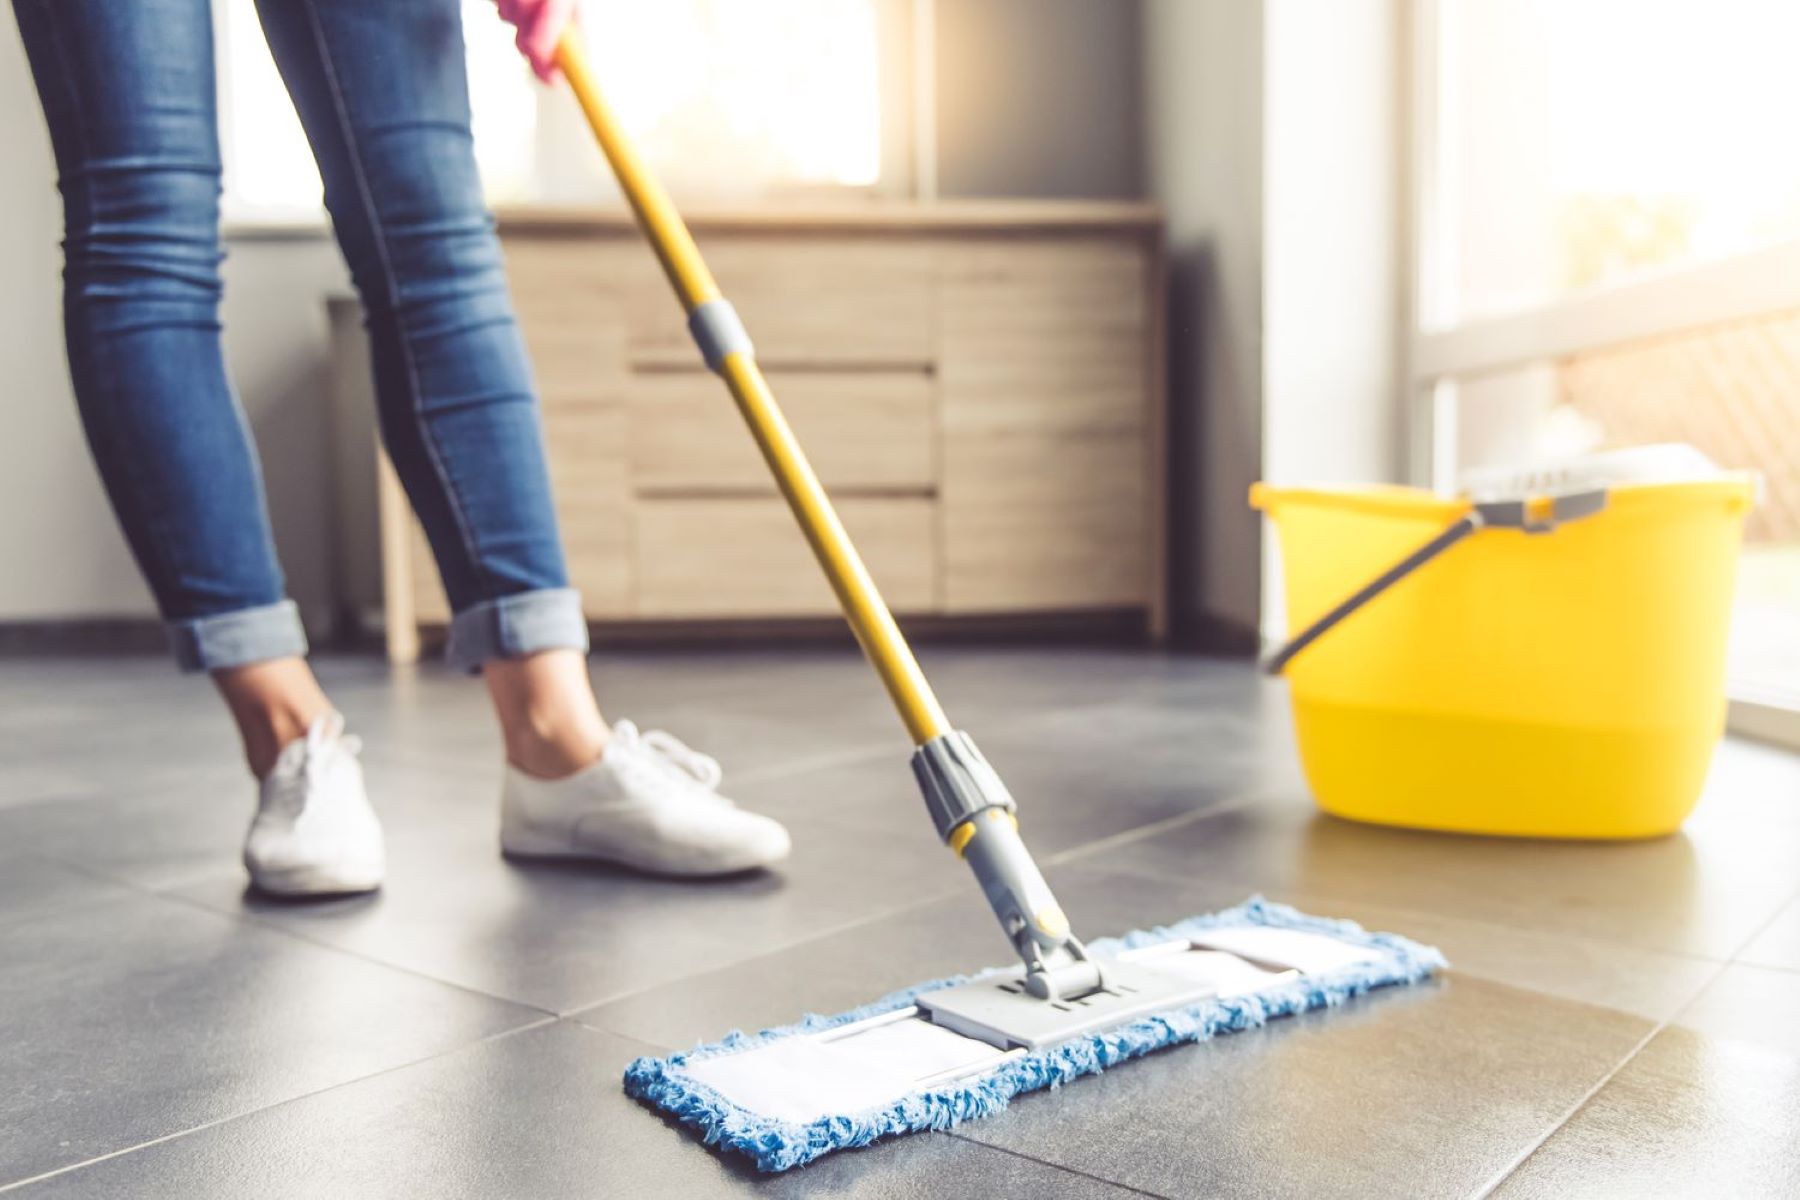 How To Mop Floors Without Hurting Your Back